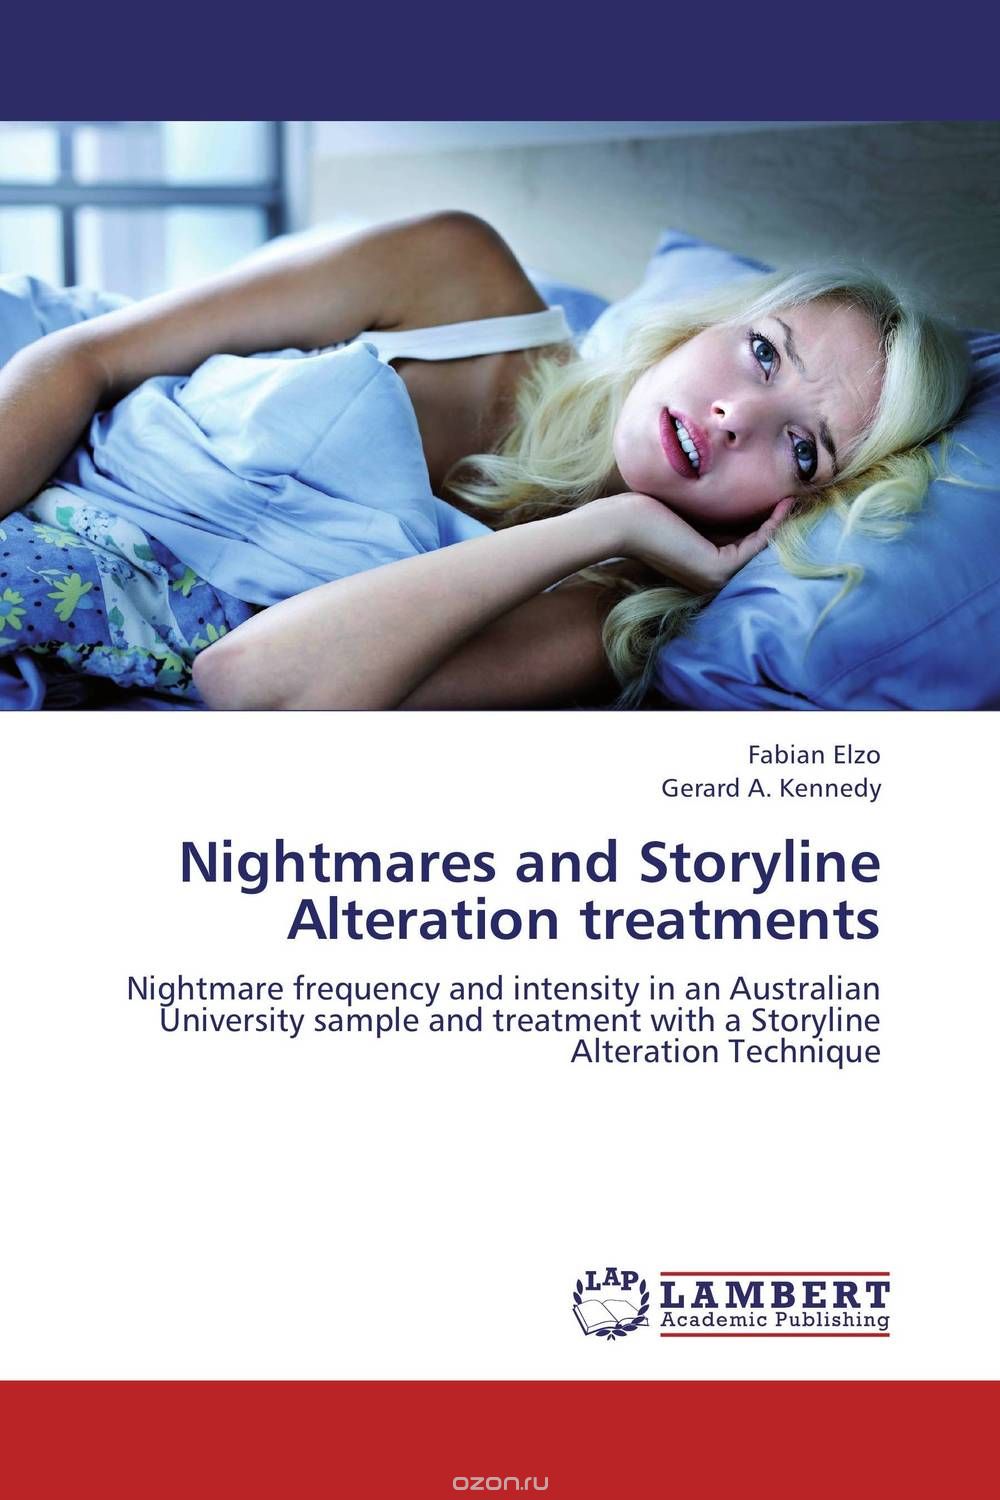 Nightmares and Storyline Alteration treatments